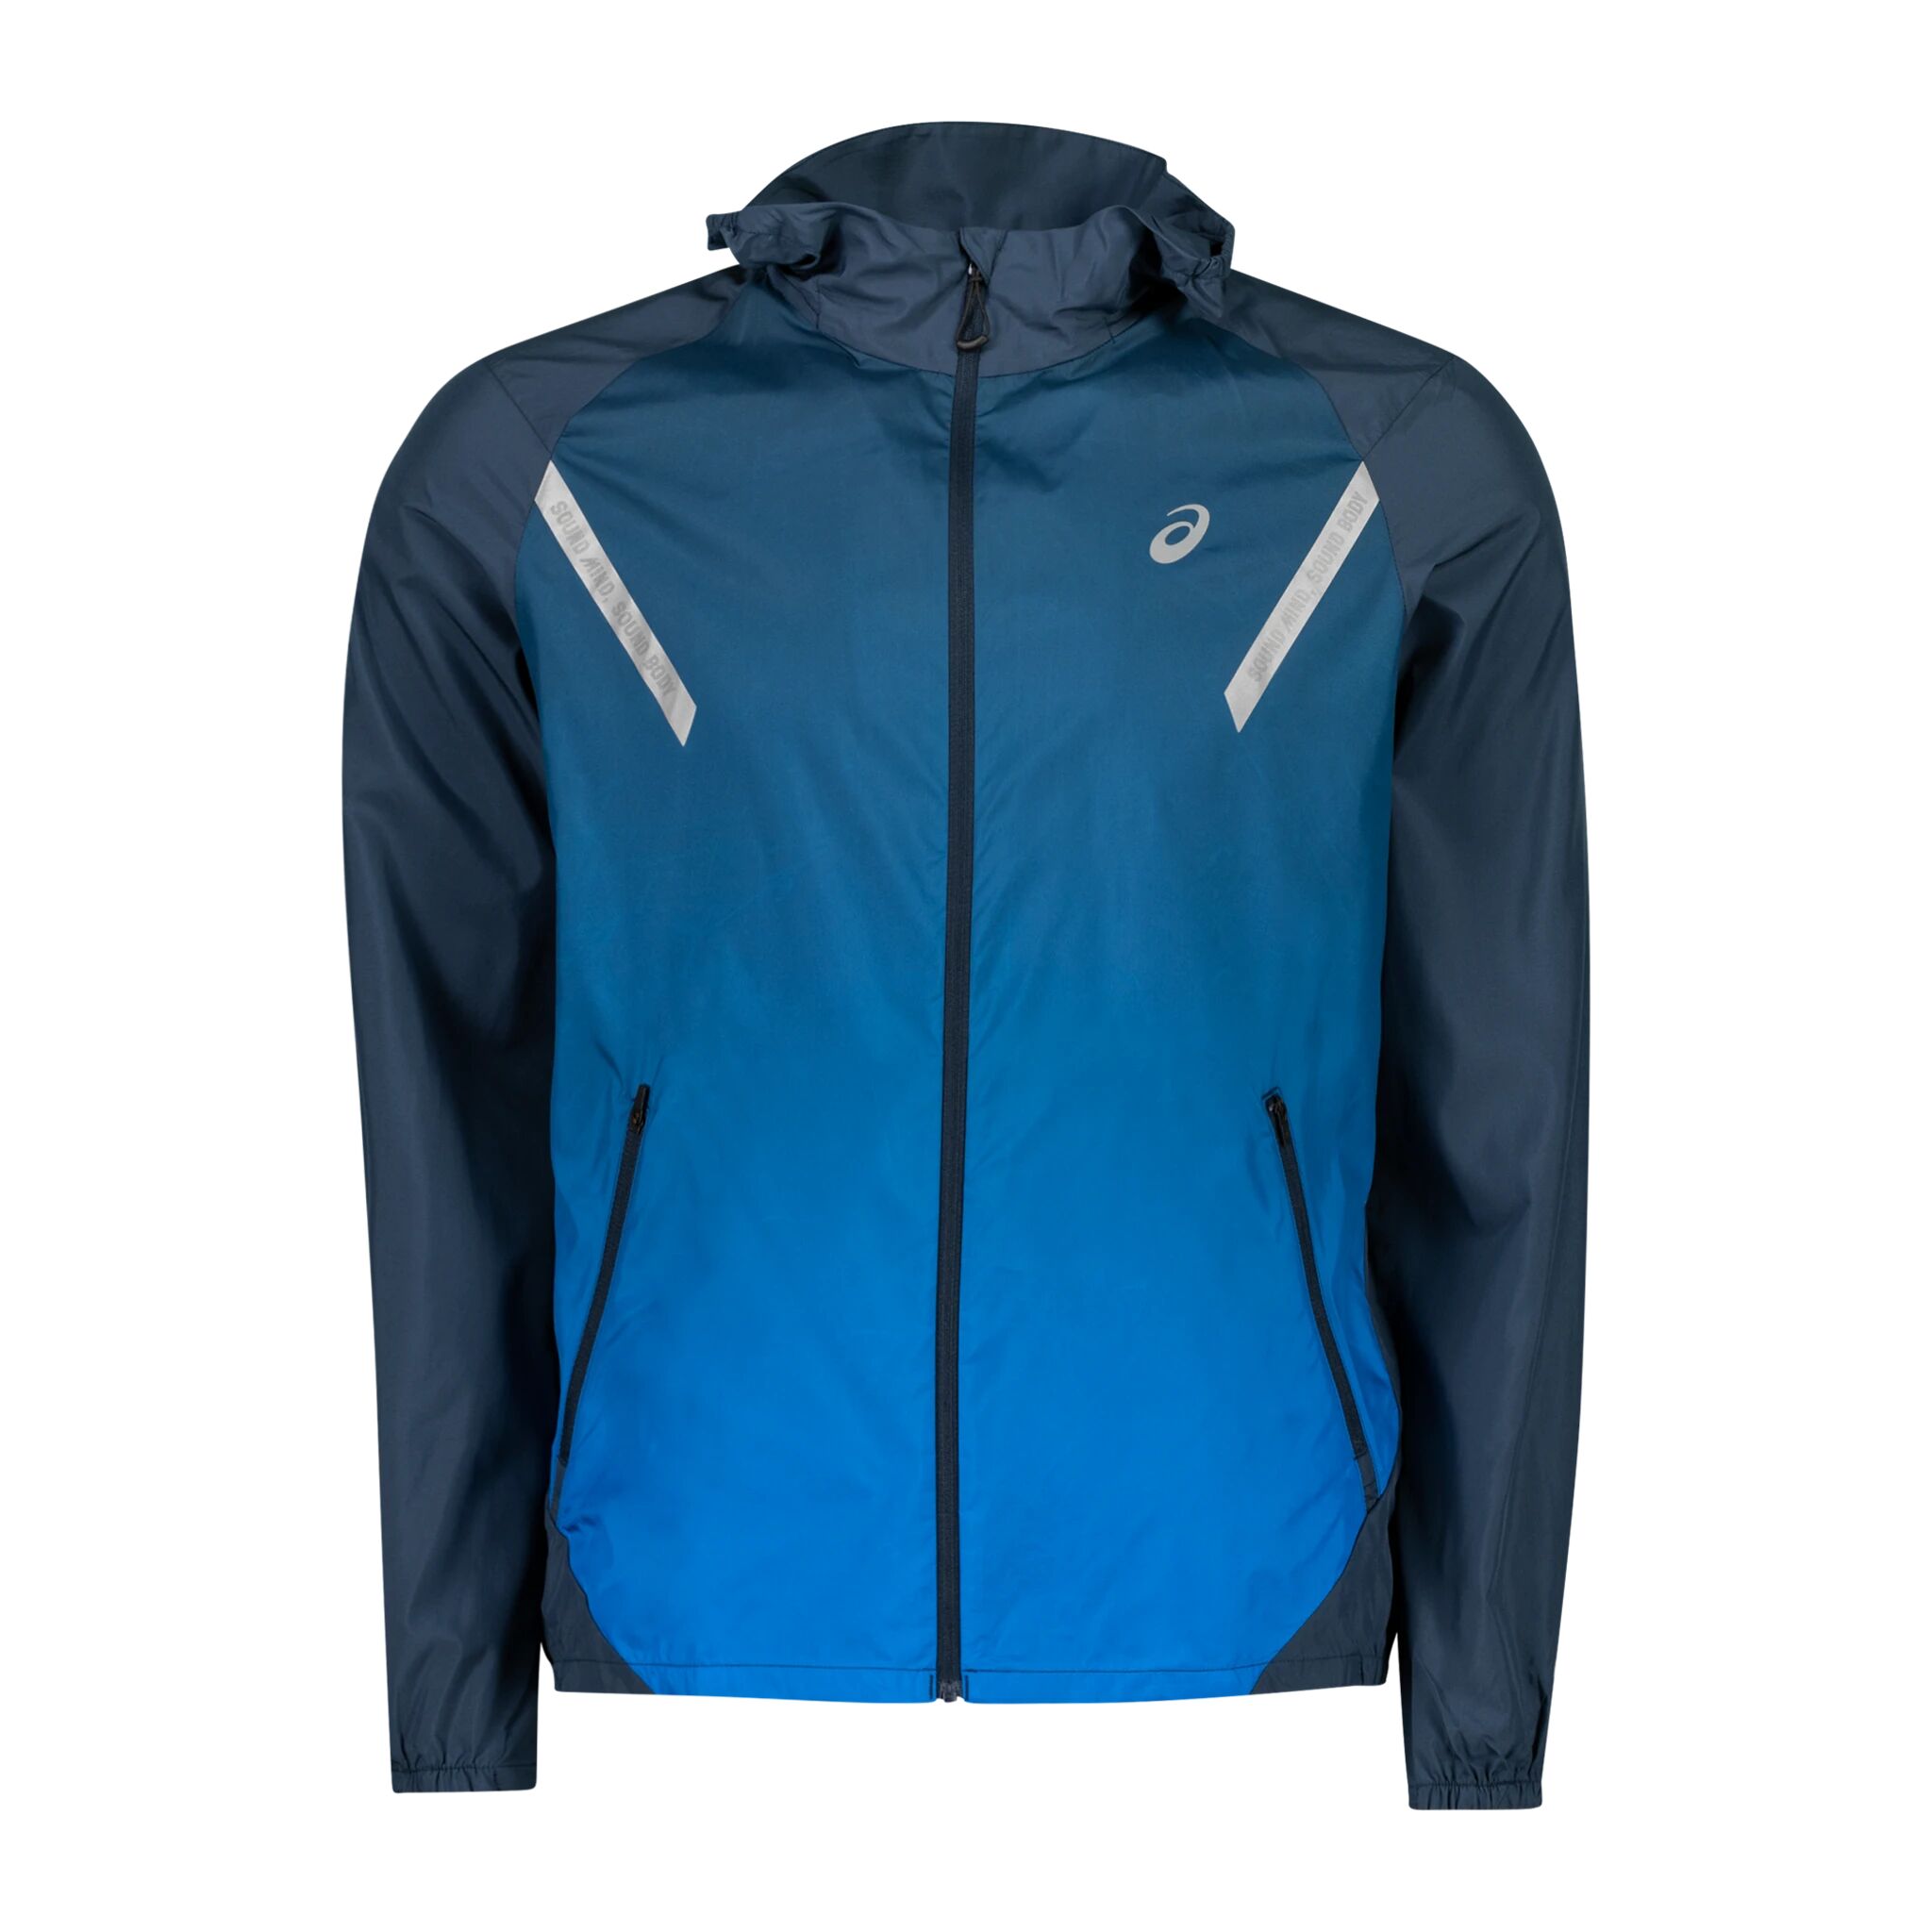 Asics Lite-Show Jacket L FRENCH BLUE/ELECTRIC